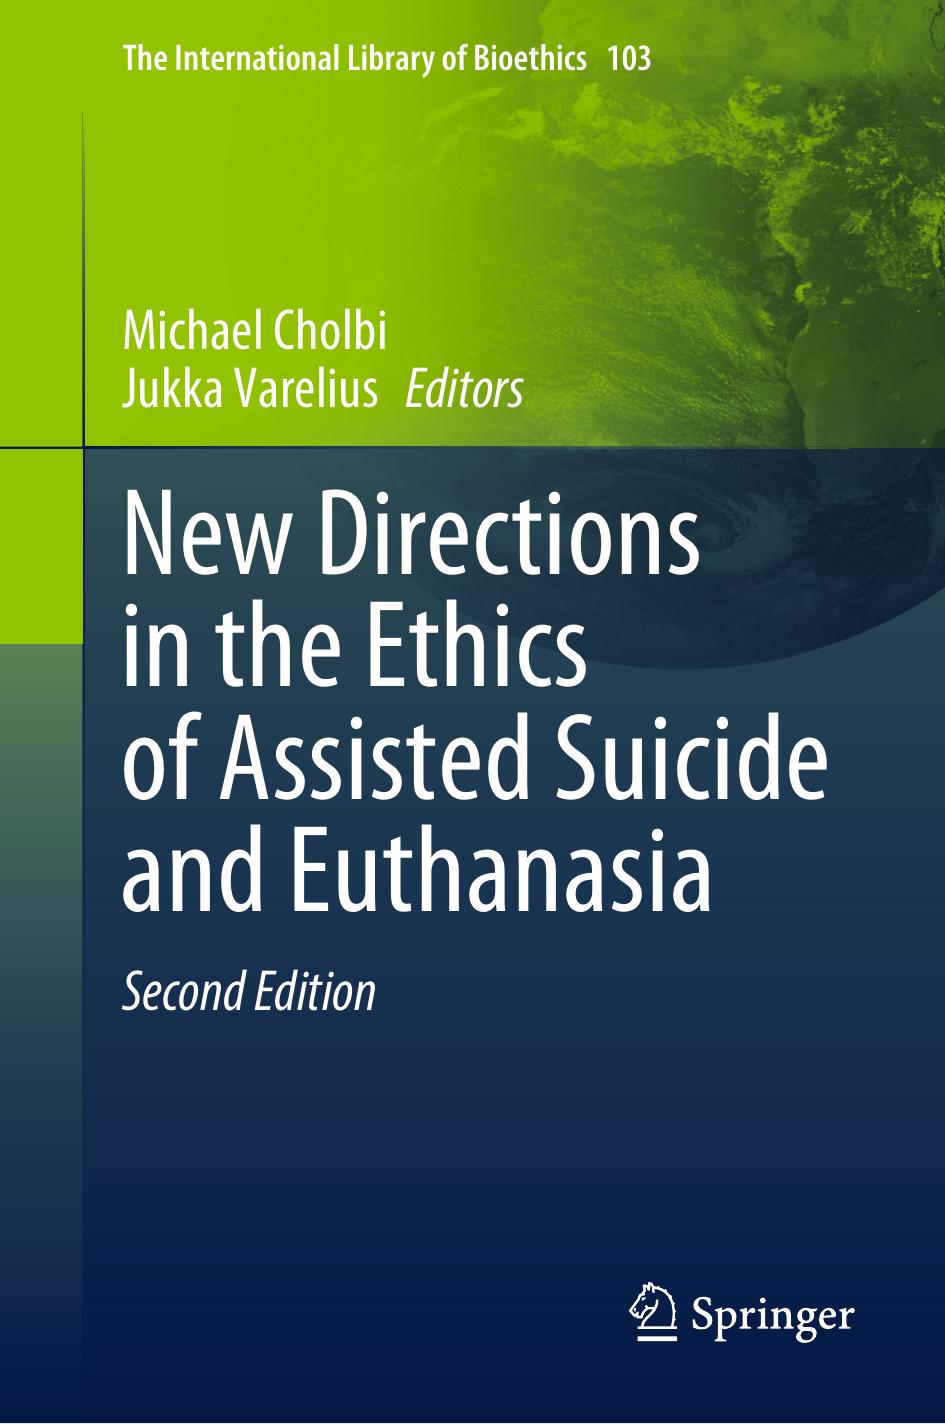 New Directions in the Ethics of Assisted Suicide and Euthanasia by Michael Cholbi Jukka Varelius